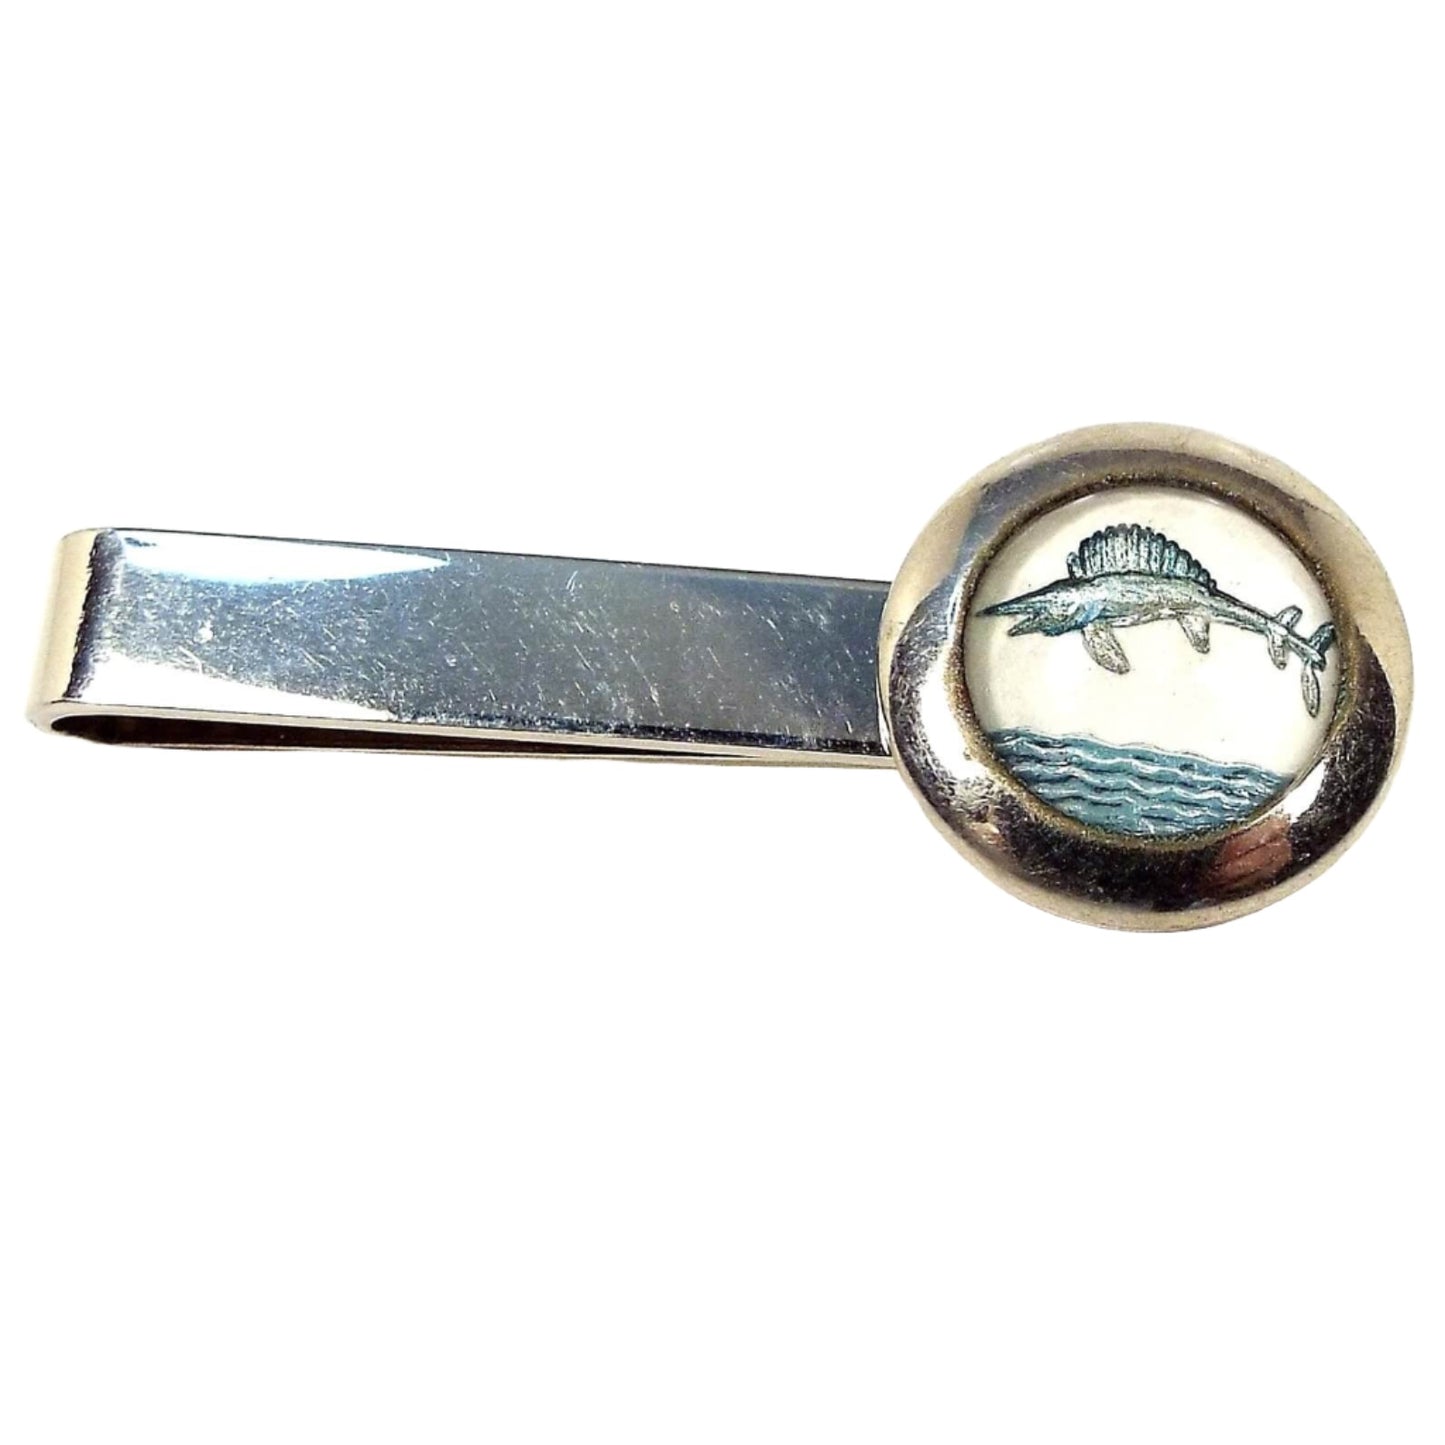 Front view of the Mid Century vintage sailfish tie bar. It is a very light gold tone in color. There is a round glass cab at the end with a design of a sailfish or marlin jumping out of the water over the waves. 